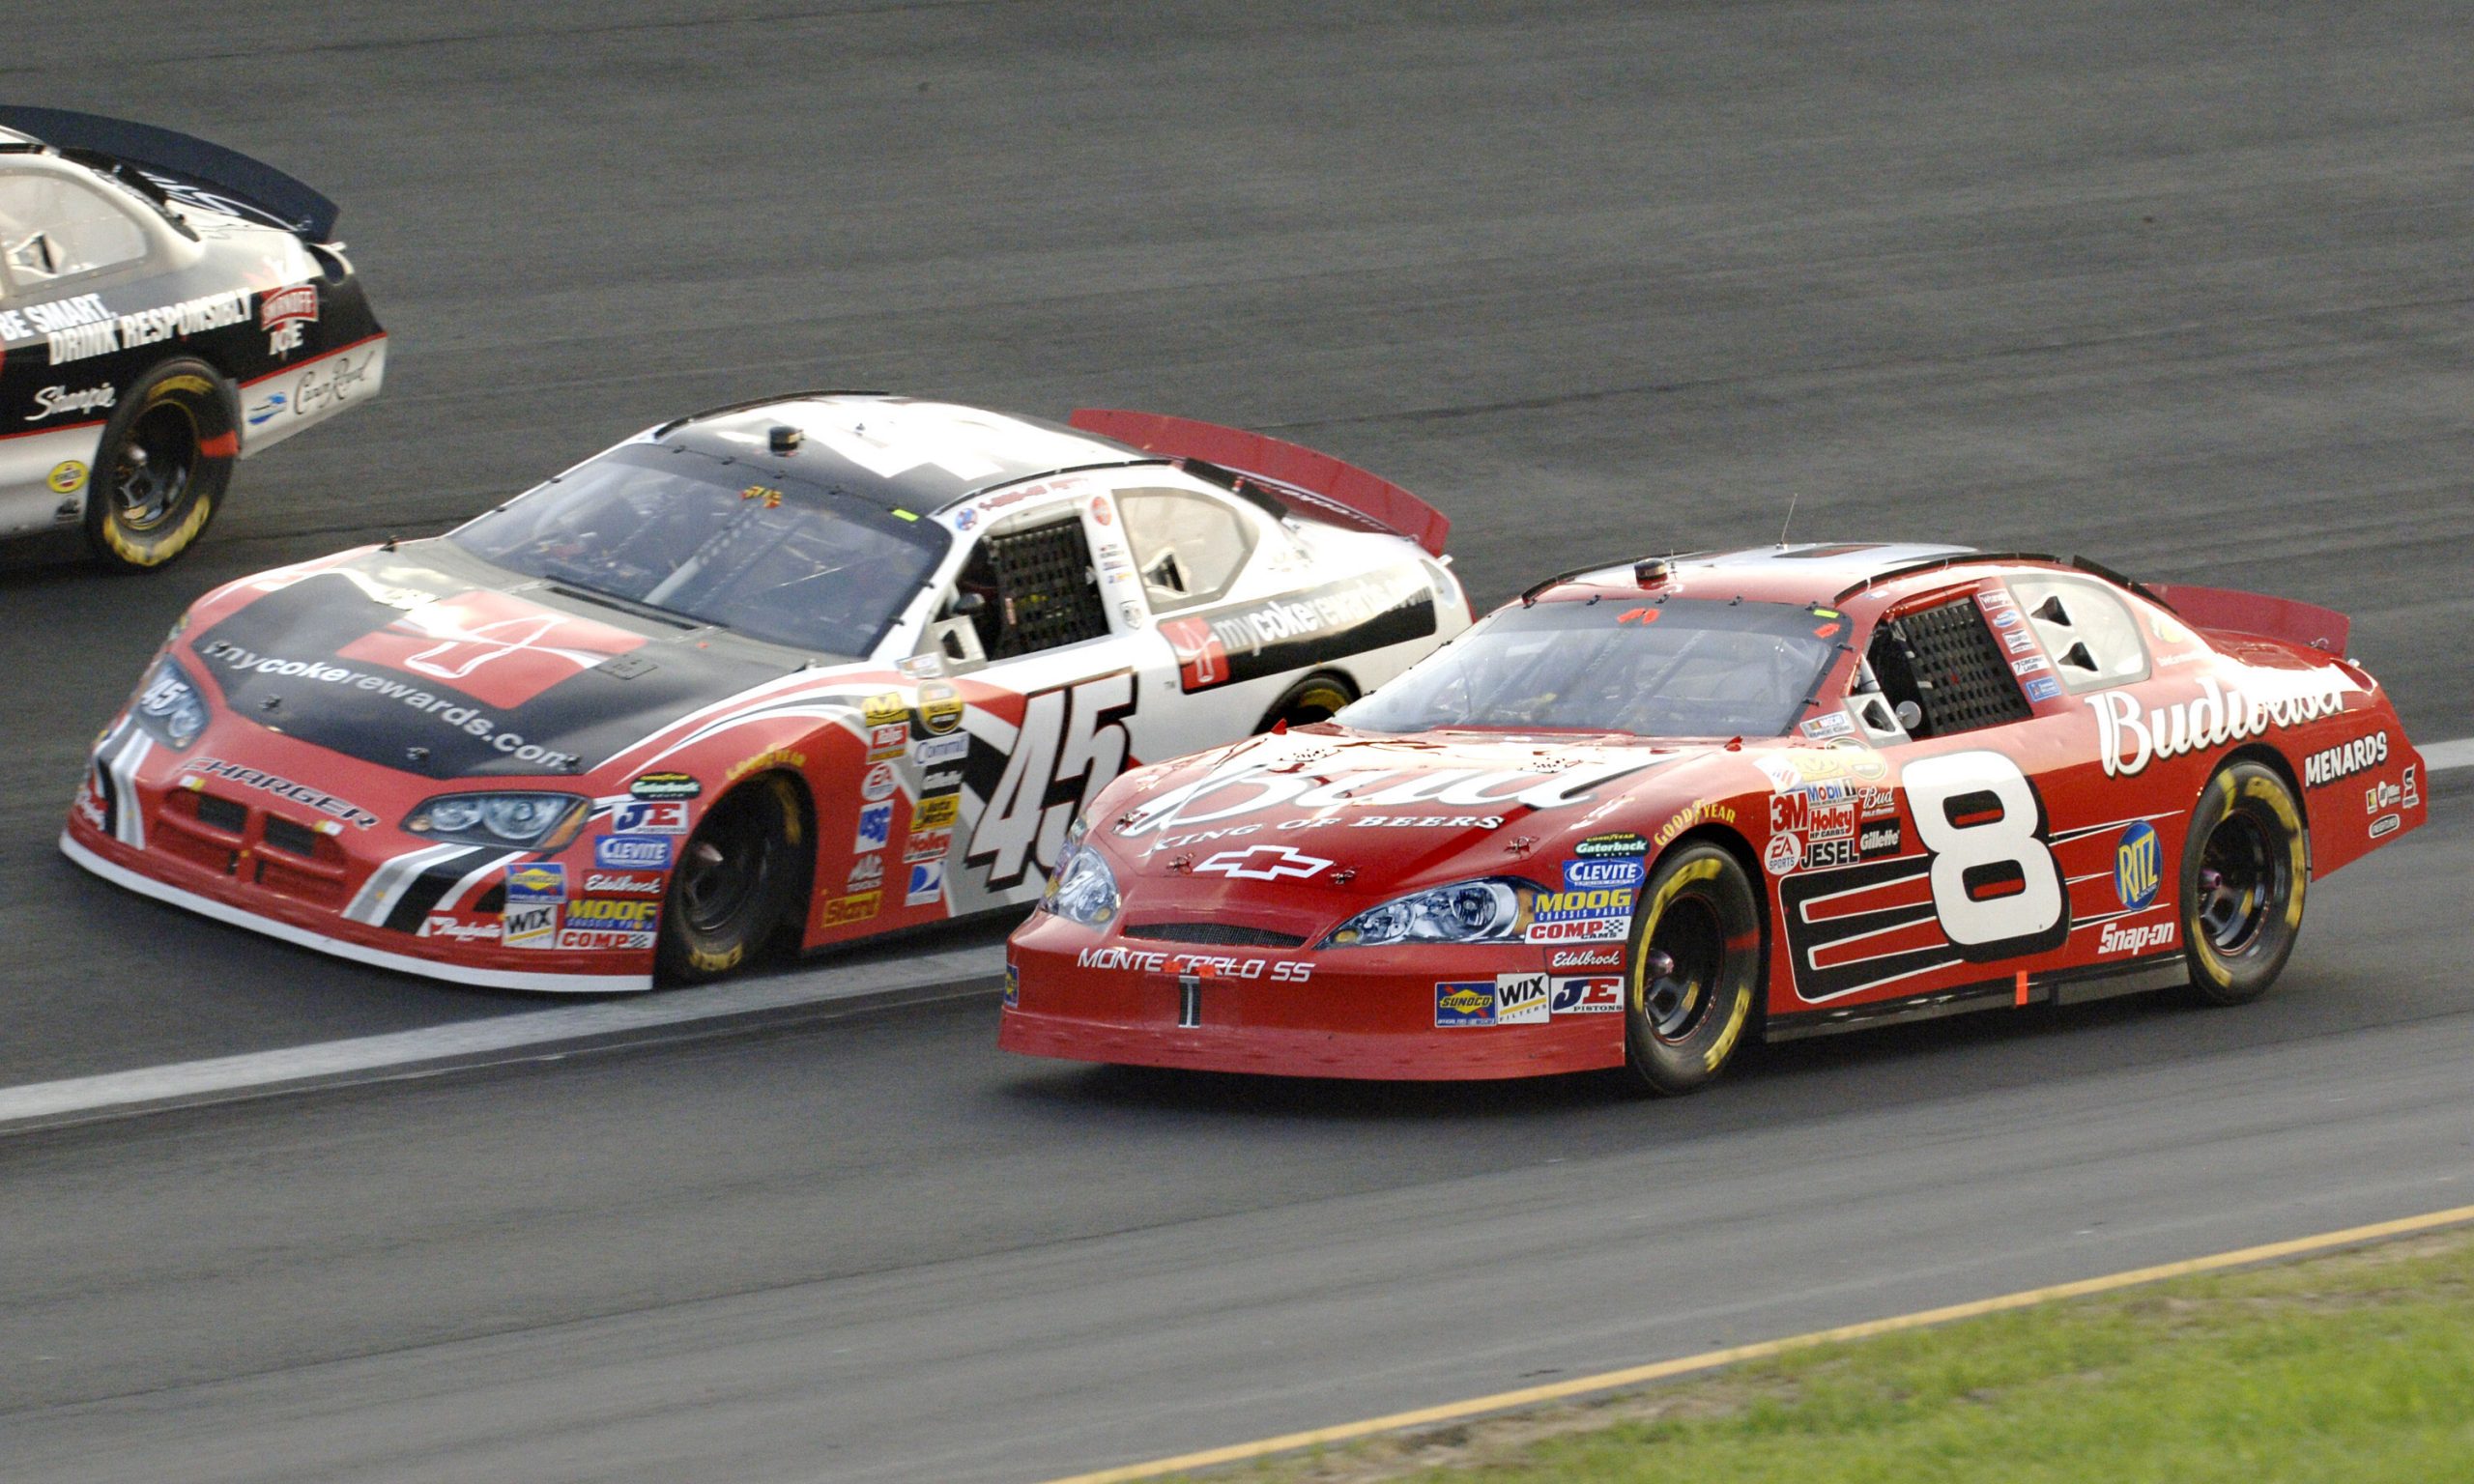 Kyle Petty (45) runs fender to fender with Dale Earnhardt Jr. in 2006.